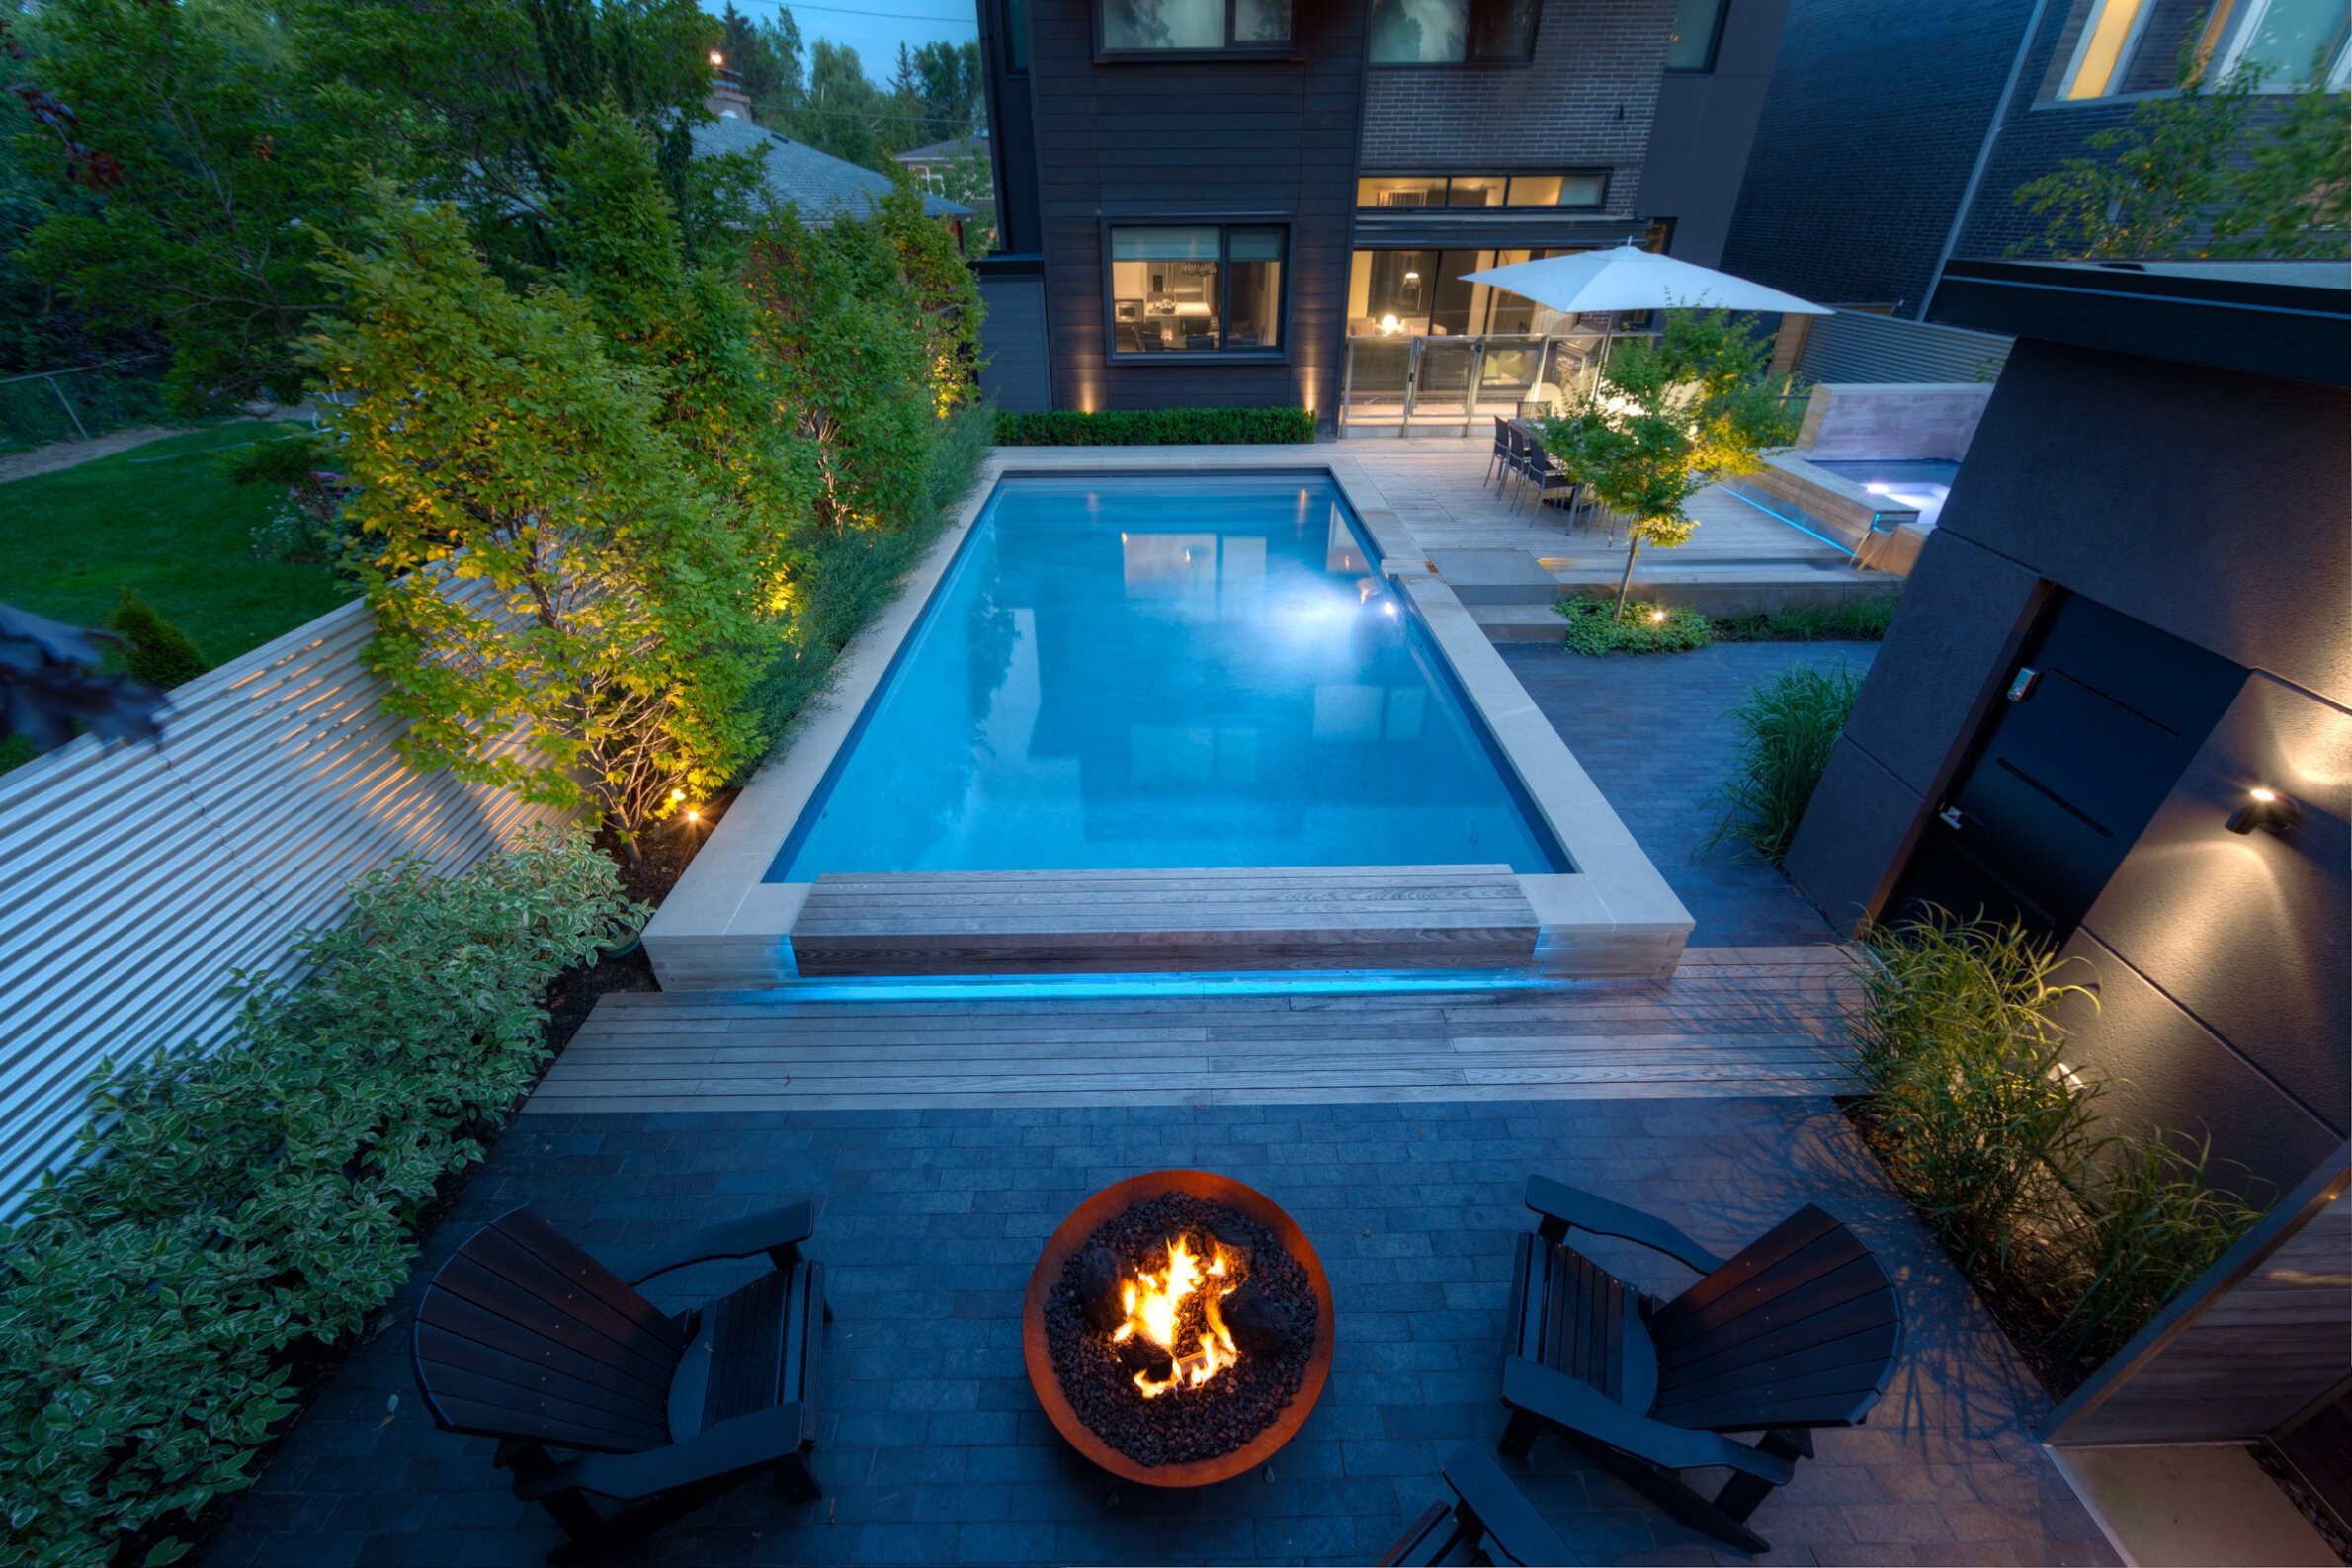 An evening view of a modern backyard with a lit swimming pool, outdoor furniture, a fire pit, and a well-lit patio adjacent to a house.